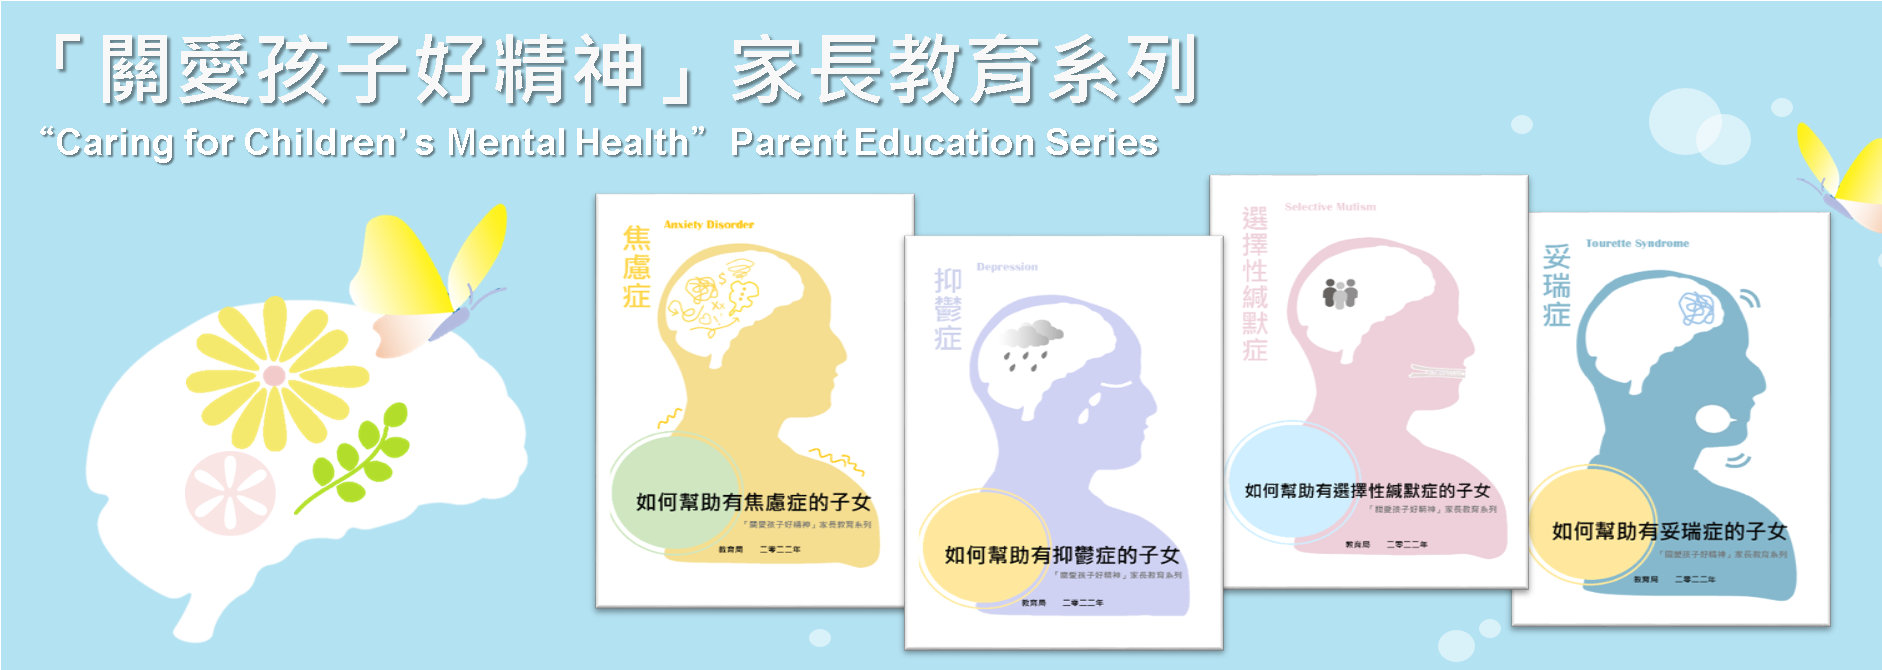 “Caring for Student’s Mental Health” Parent Education Series – Pamphlets